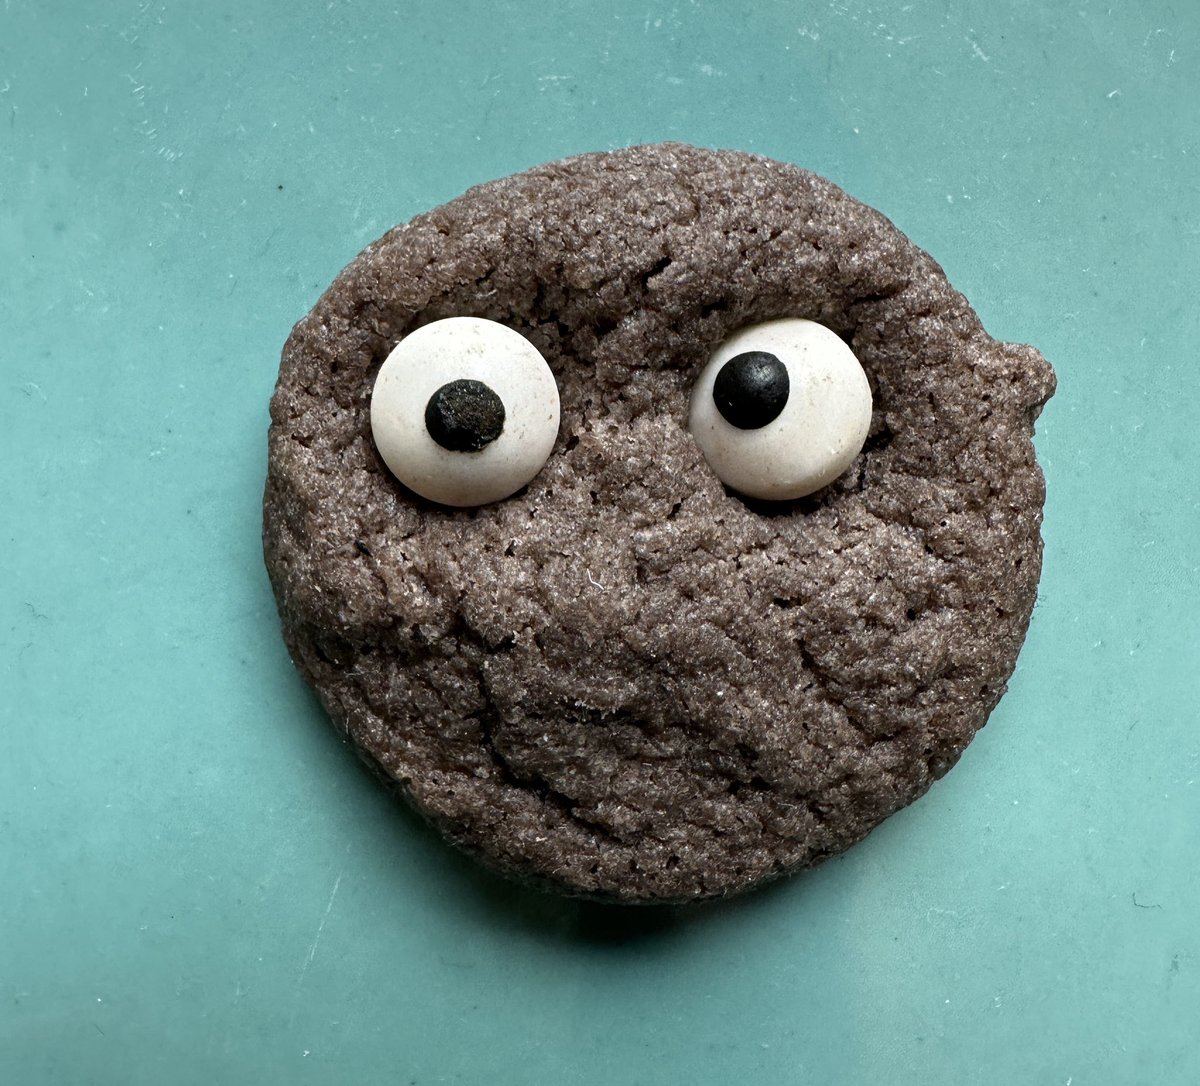 THIS is the cookie that a hippie lady in a park in Vermont gave us the day of the ☀️ eclipse. She said it would help us: “SEE BETTER!” We have not eaten it. I don’t think we should eat it. (At least not ‘til my edits are done. 😉😂!)